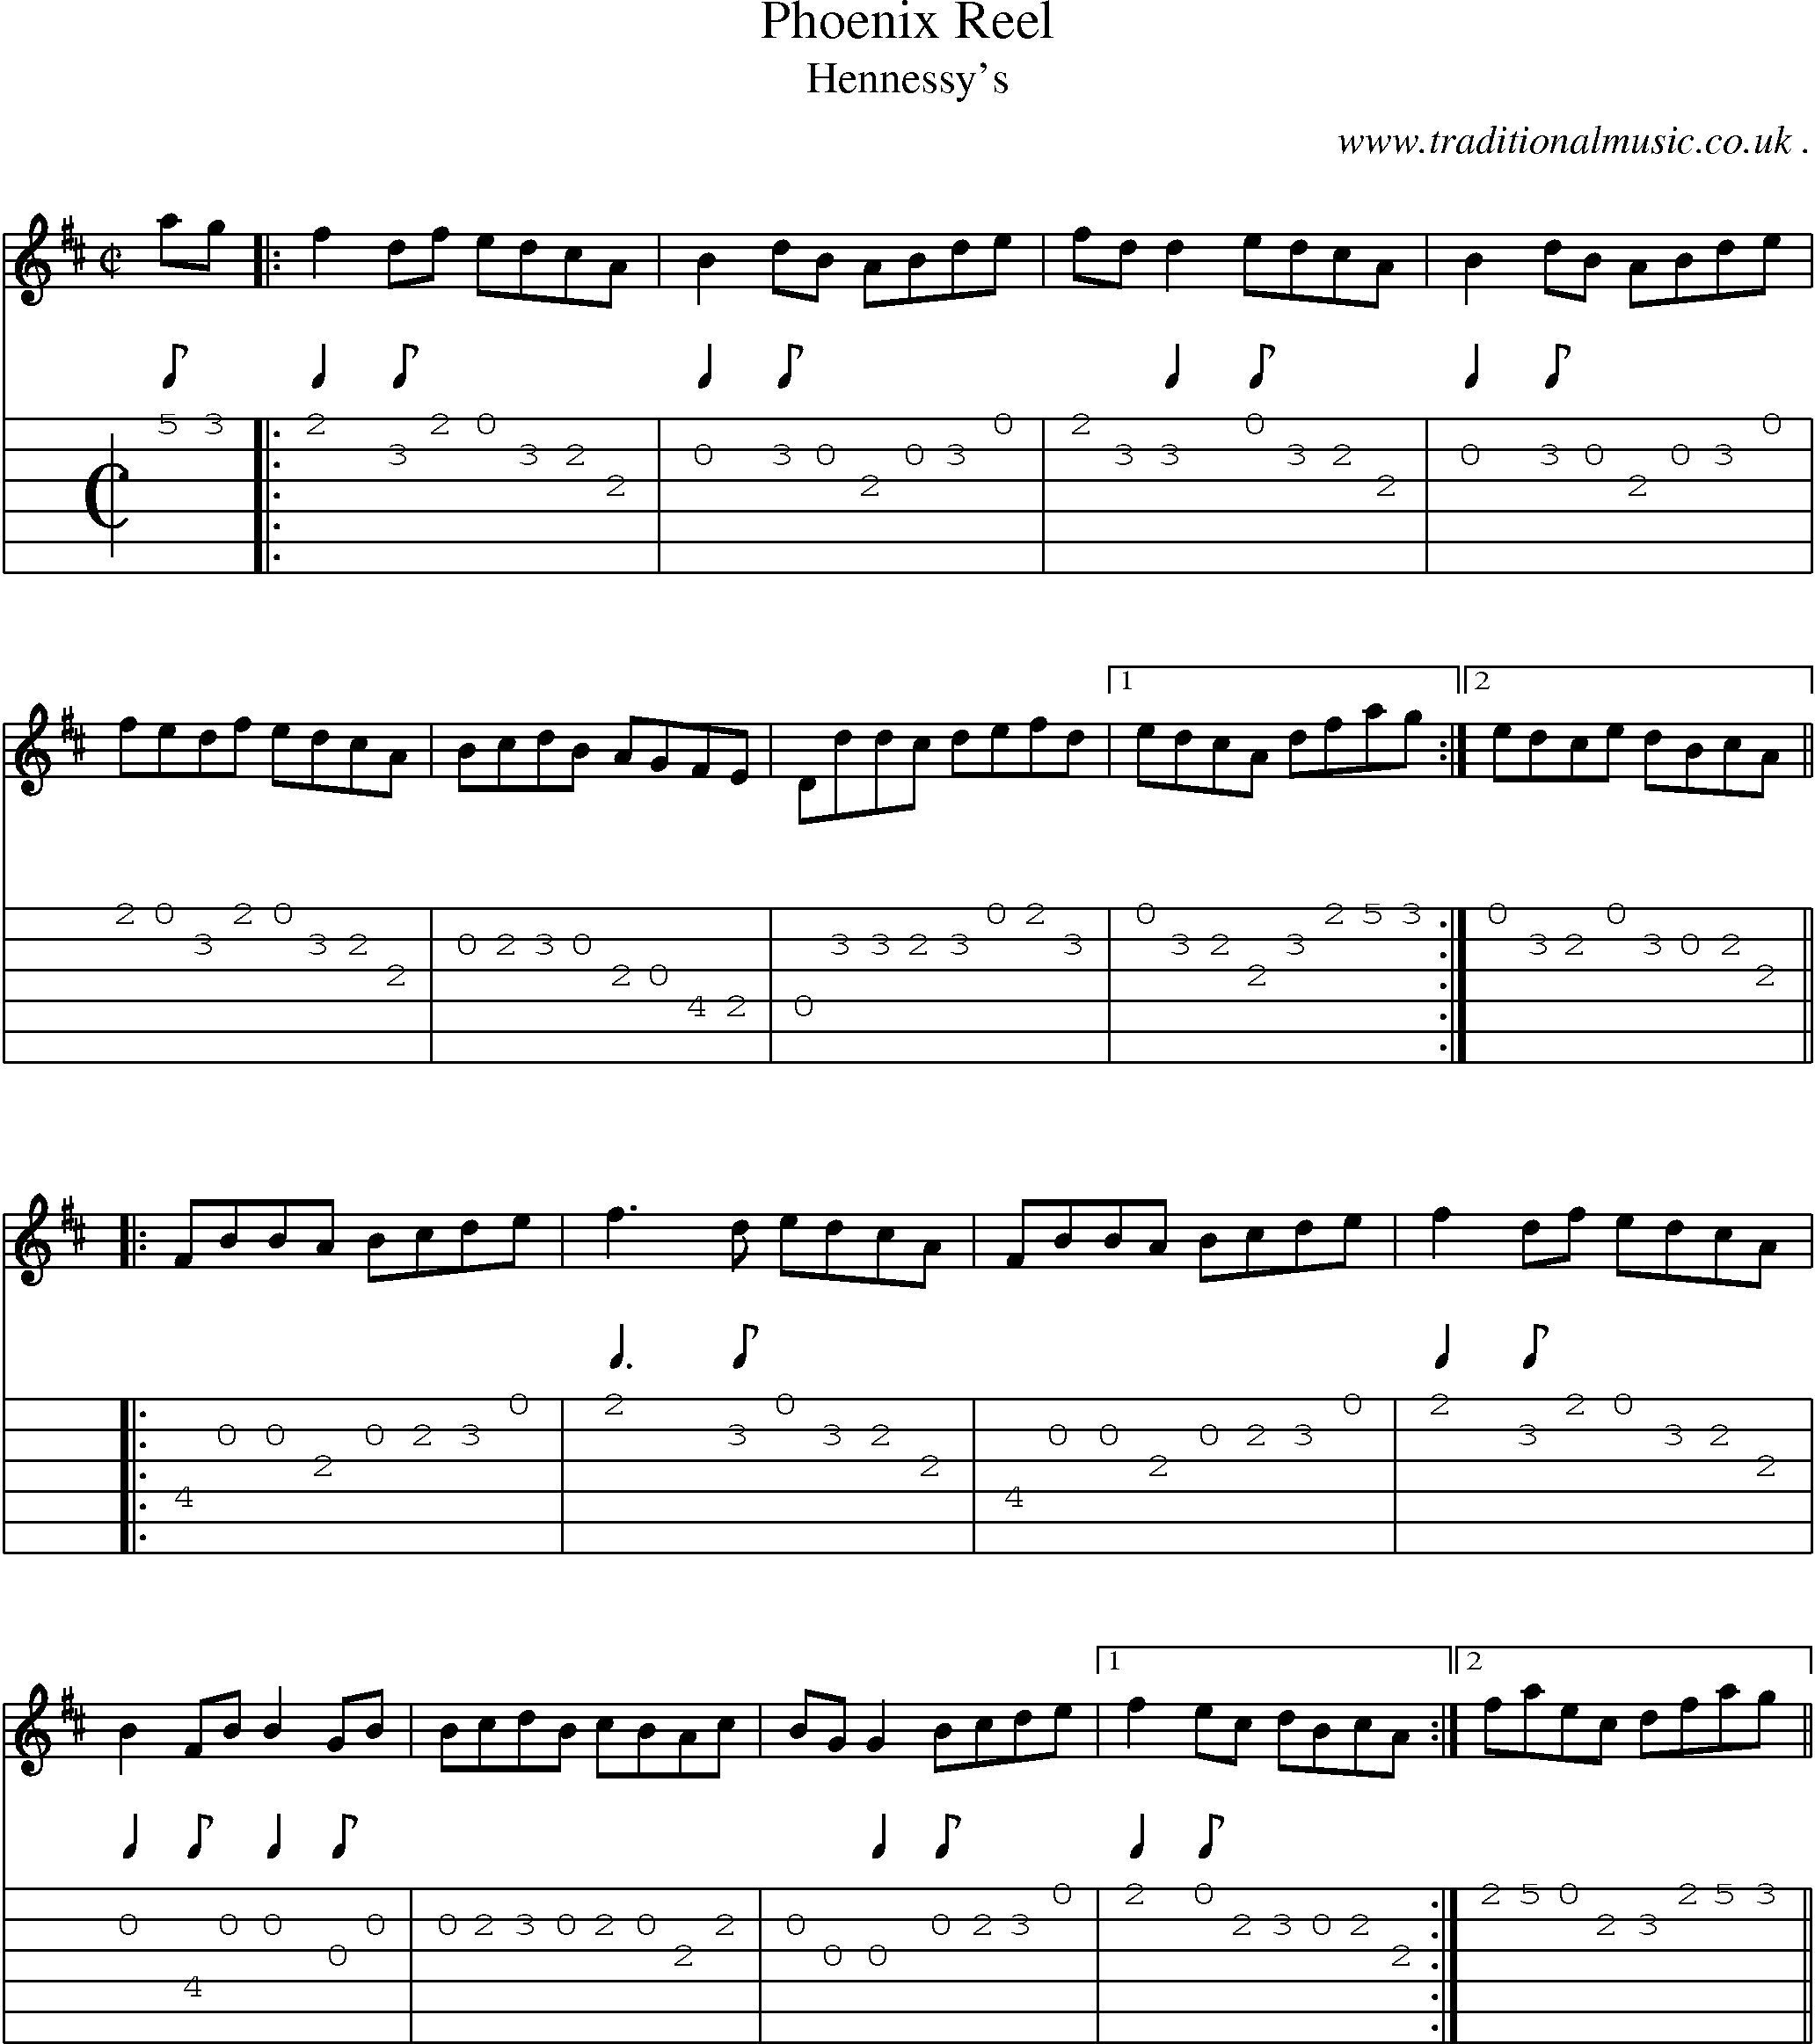 Sheet-Music and Guitar Tabs for Phoenix Reel